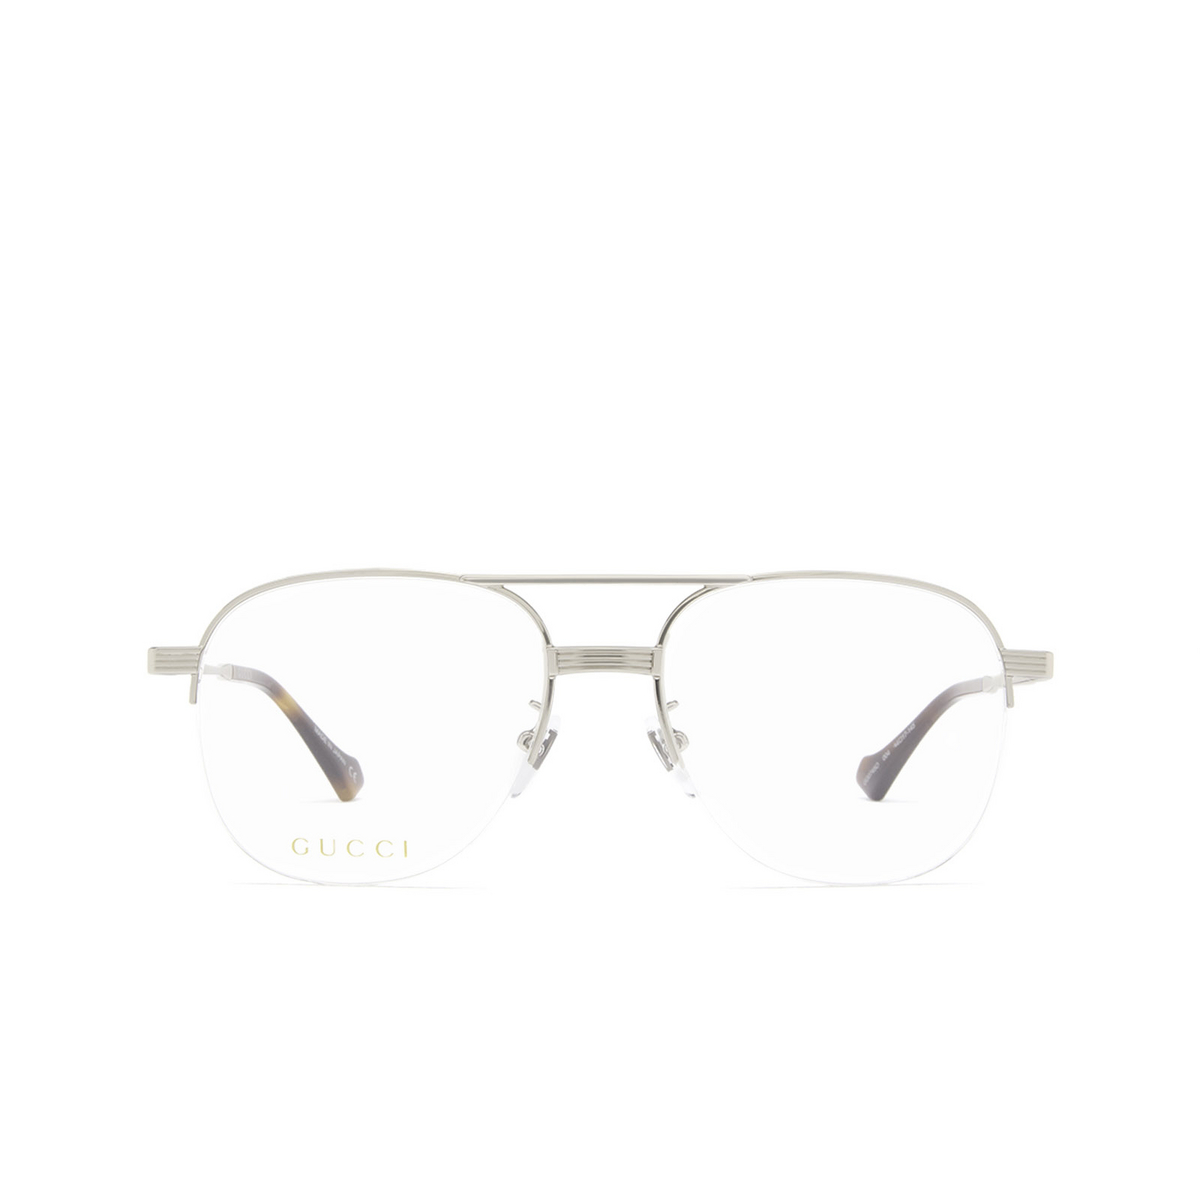 Gucci® Aviator Eyeglasses: GG0745O color Silver 004 - front view.